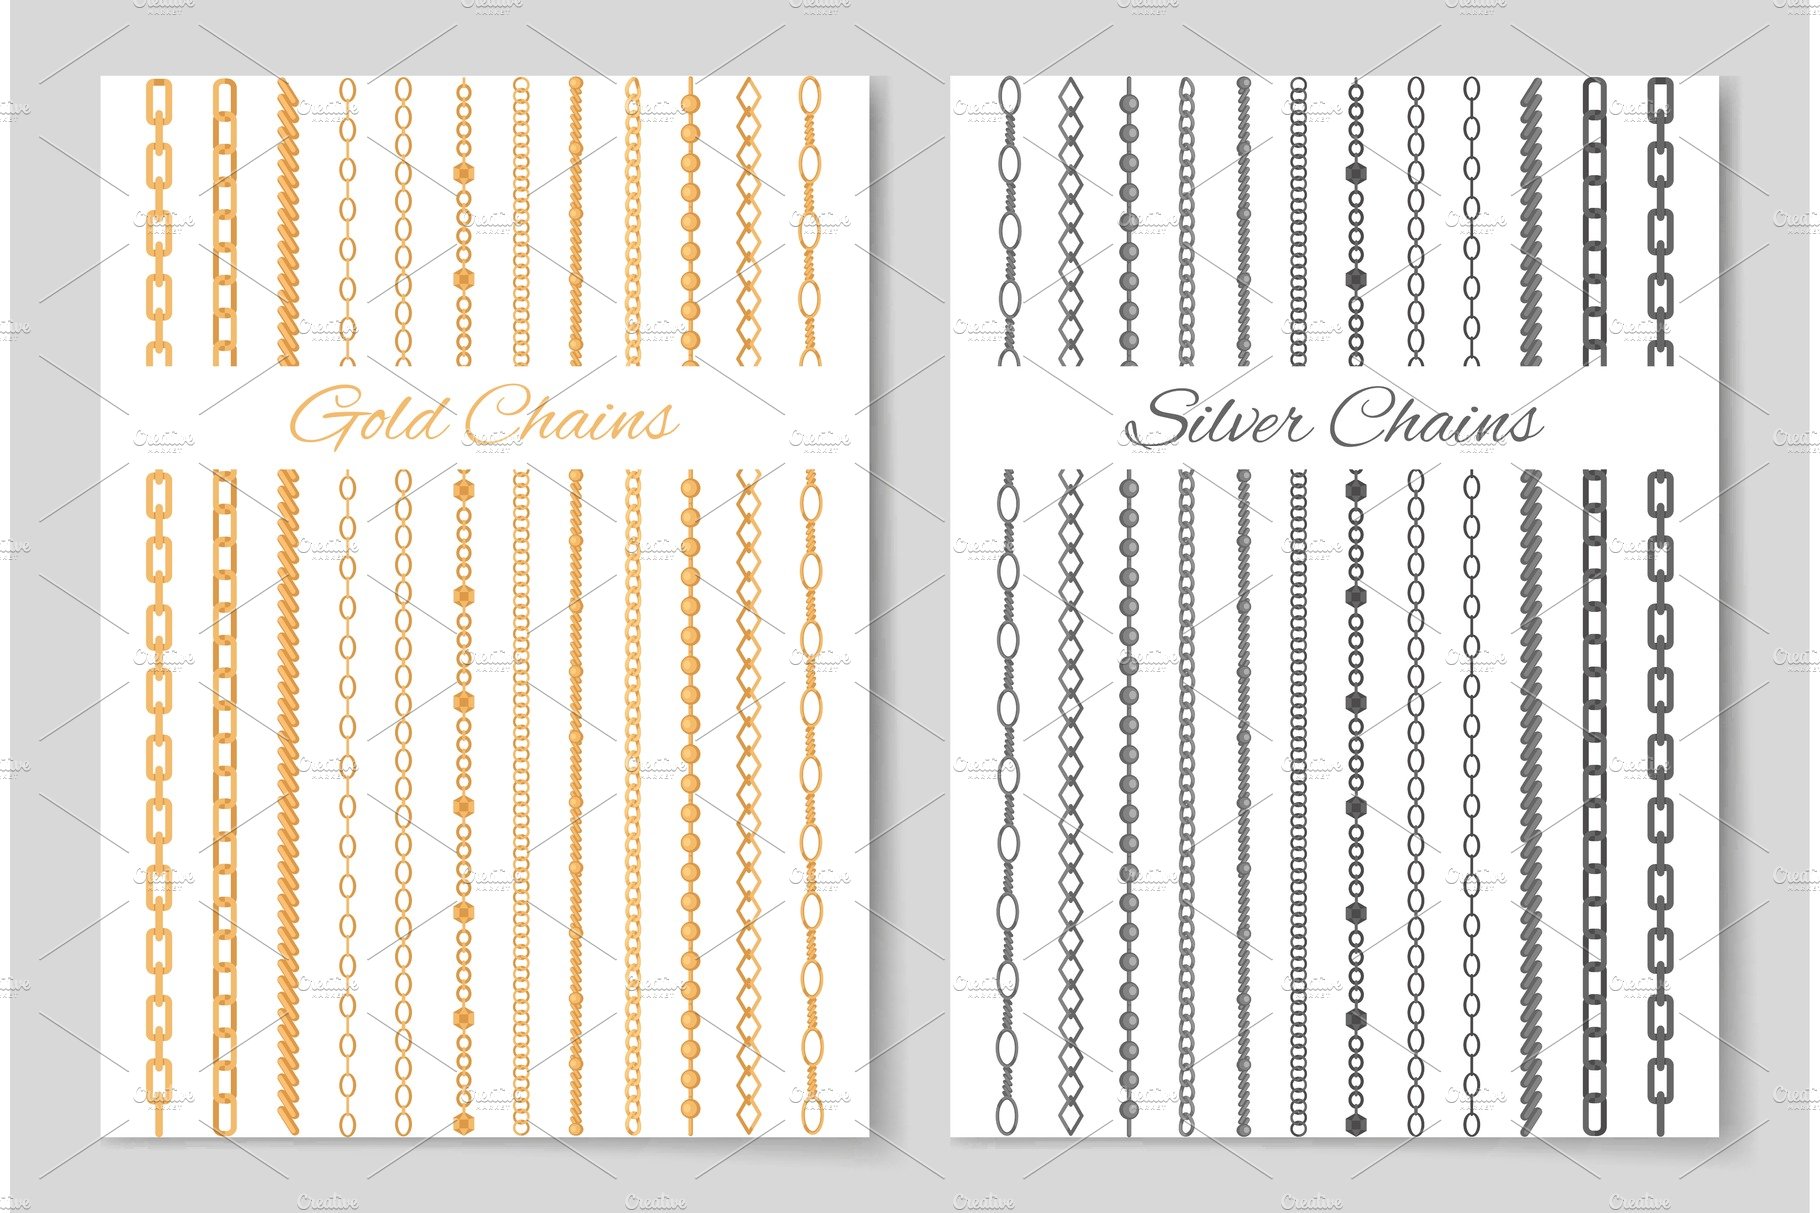 Silver and Gold Chains Promotional Posters Set cover image.